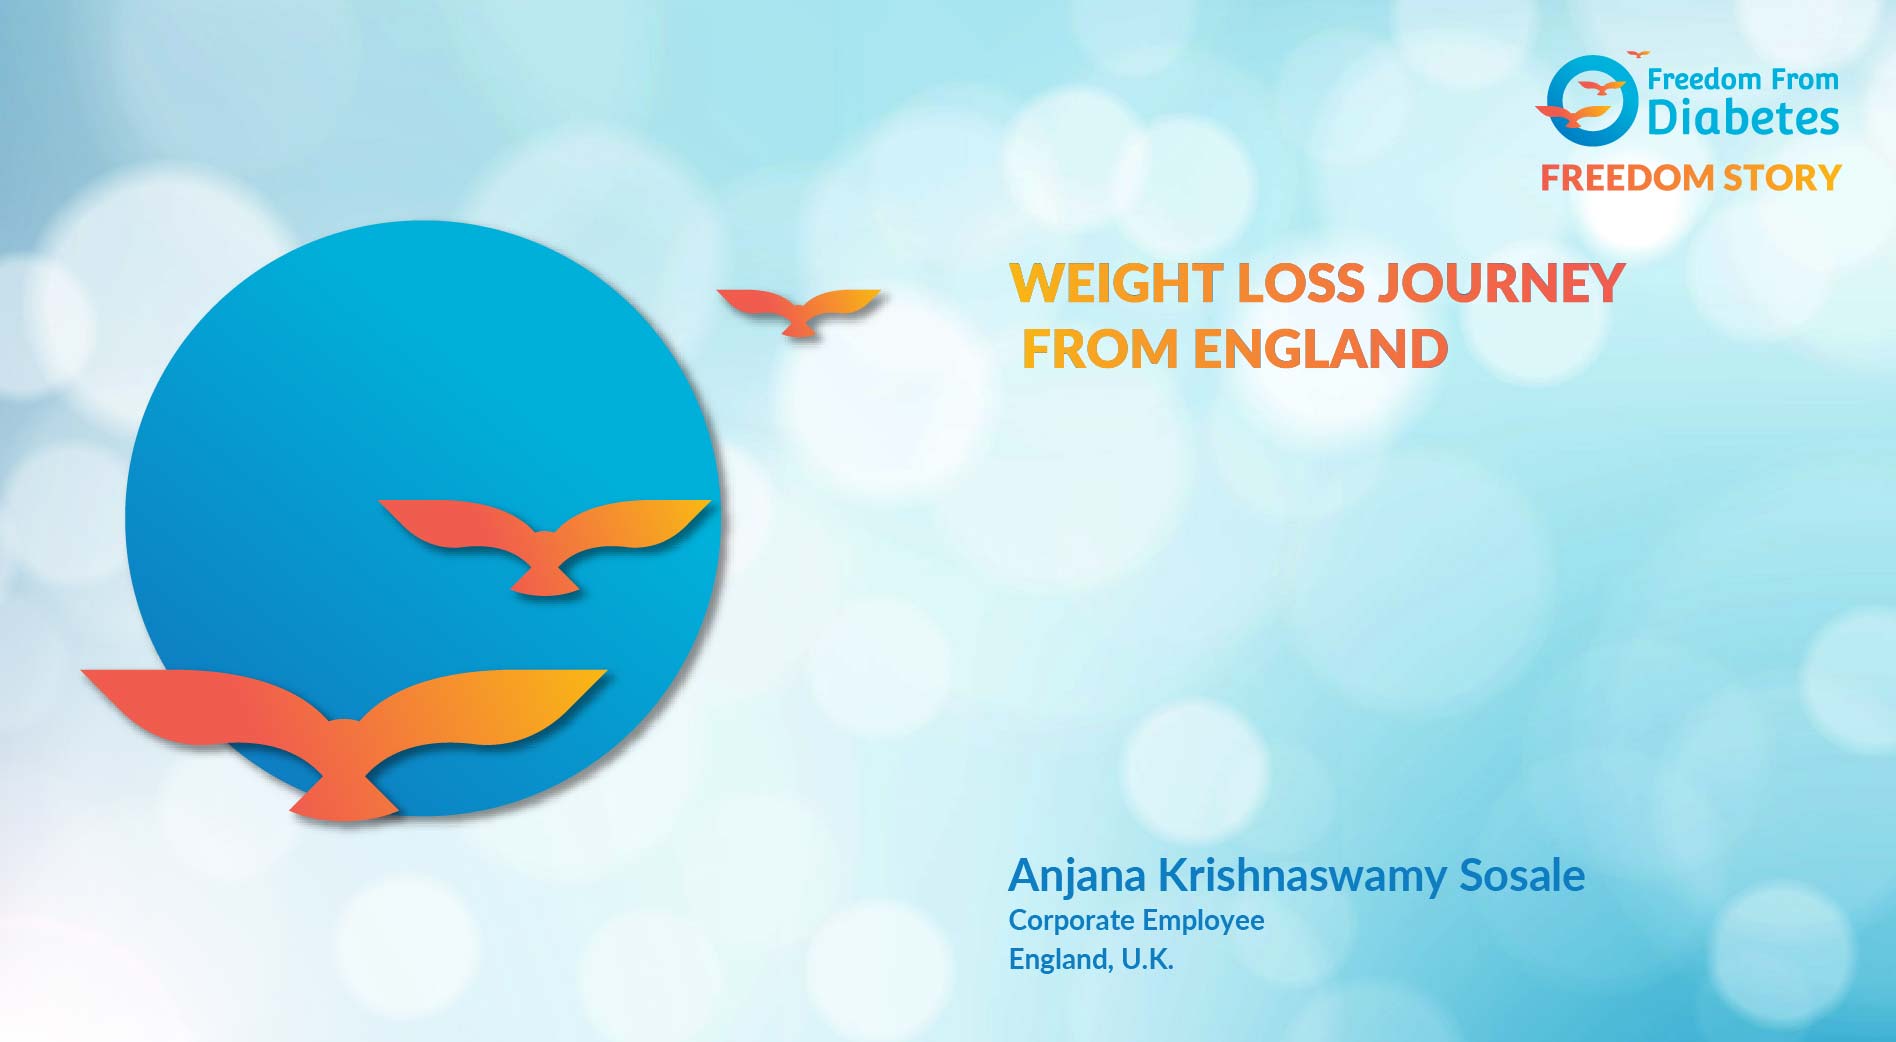 Weight loss journey from England